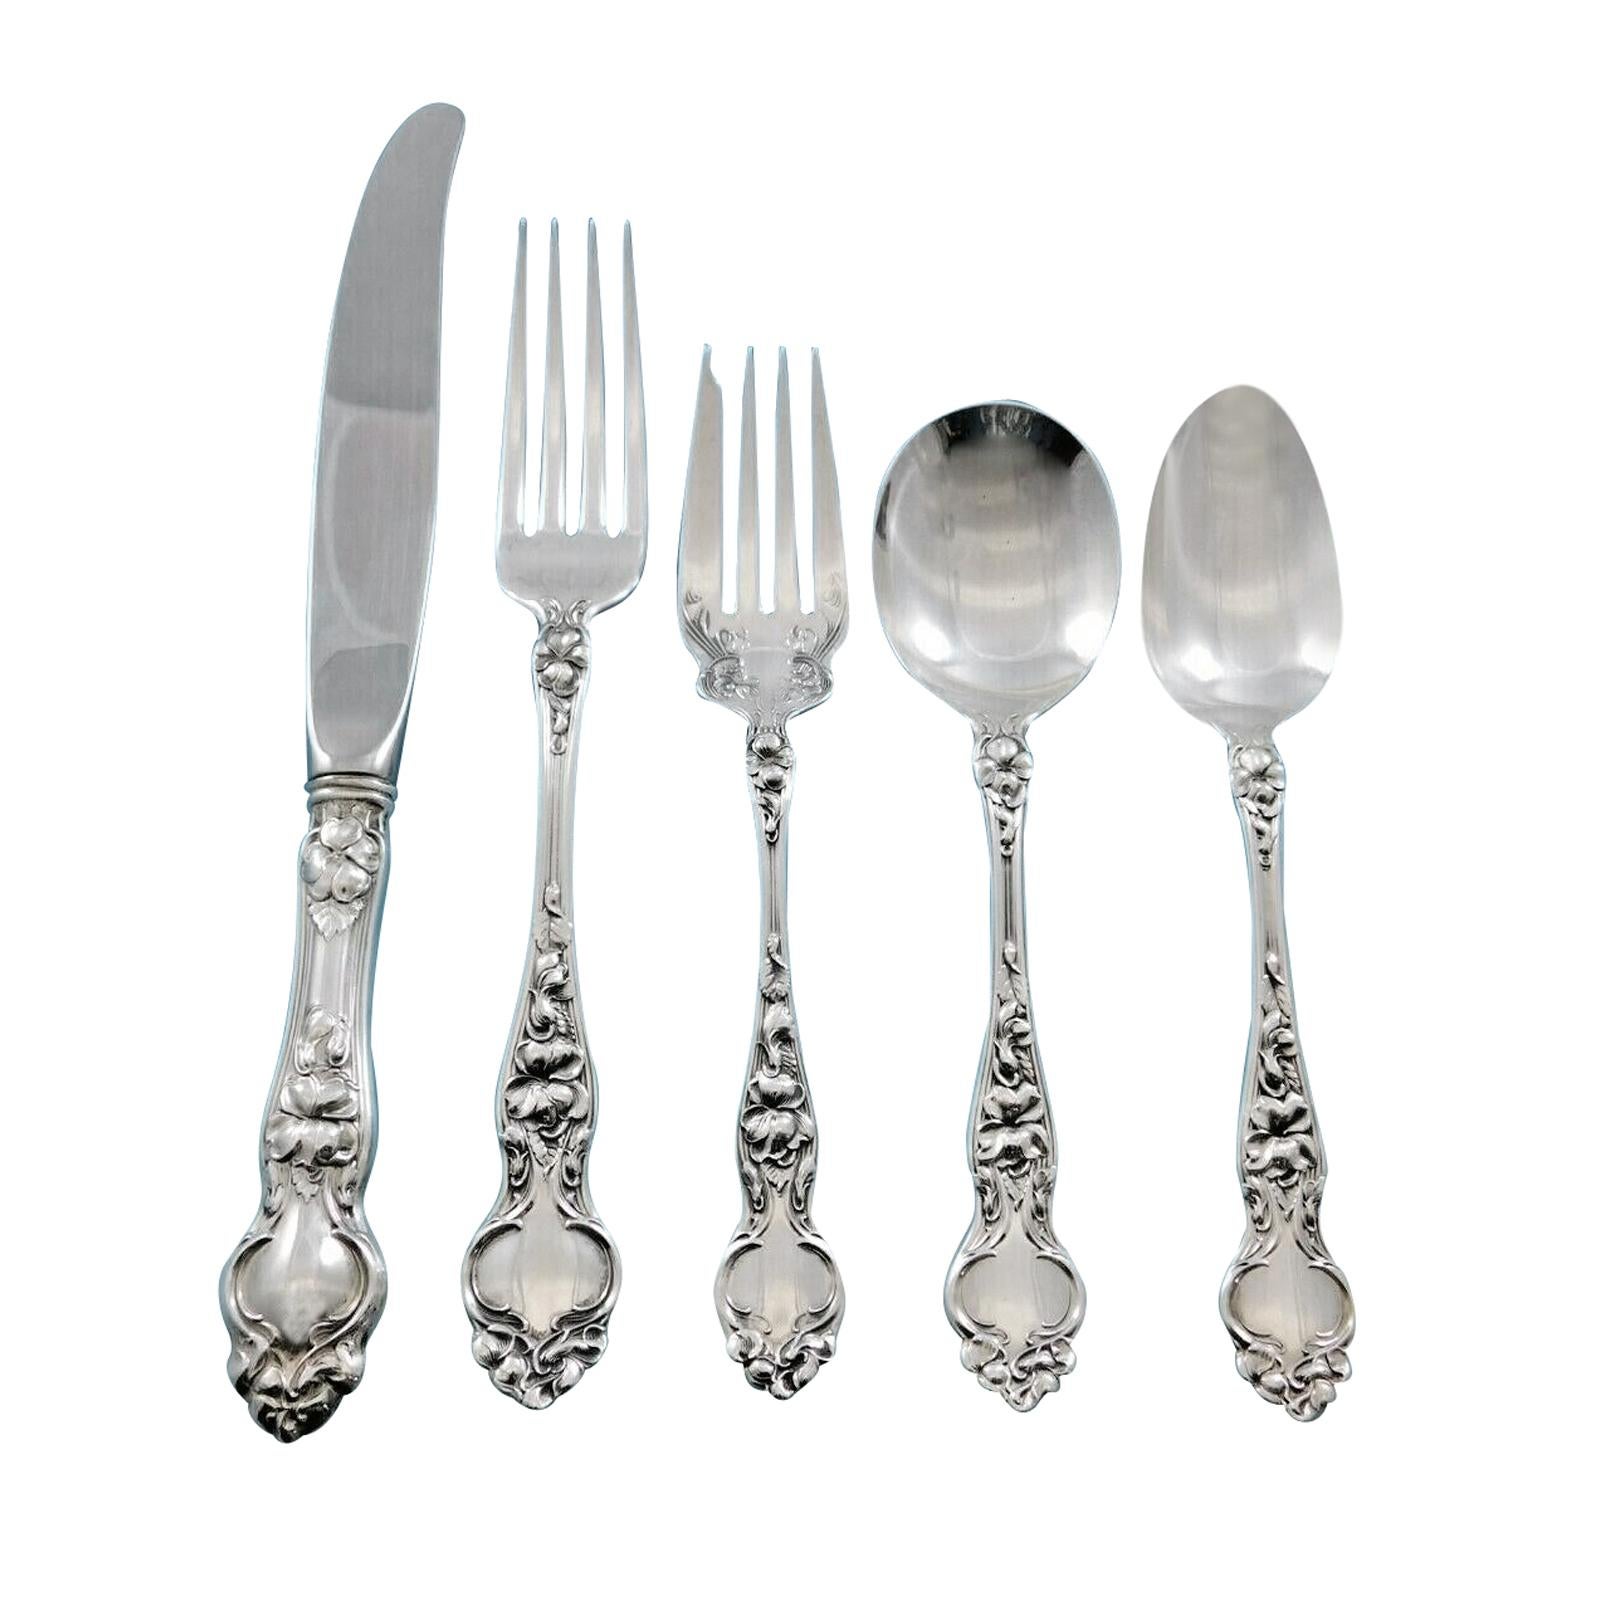 Violet by Wallace Sterling Silver Flatware Service for 8 Set 40 Pcs No Monograms